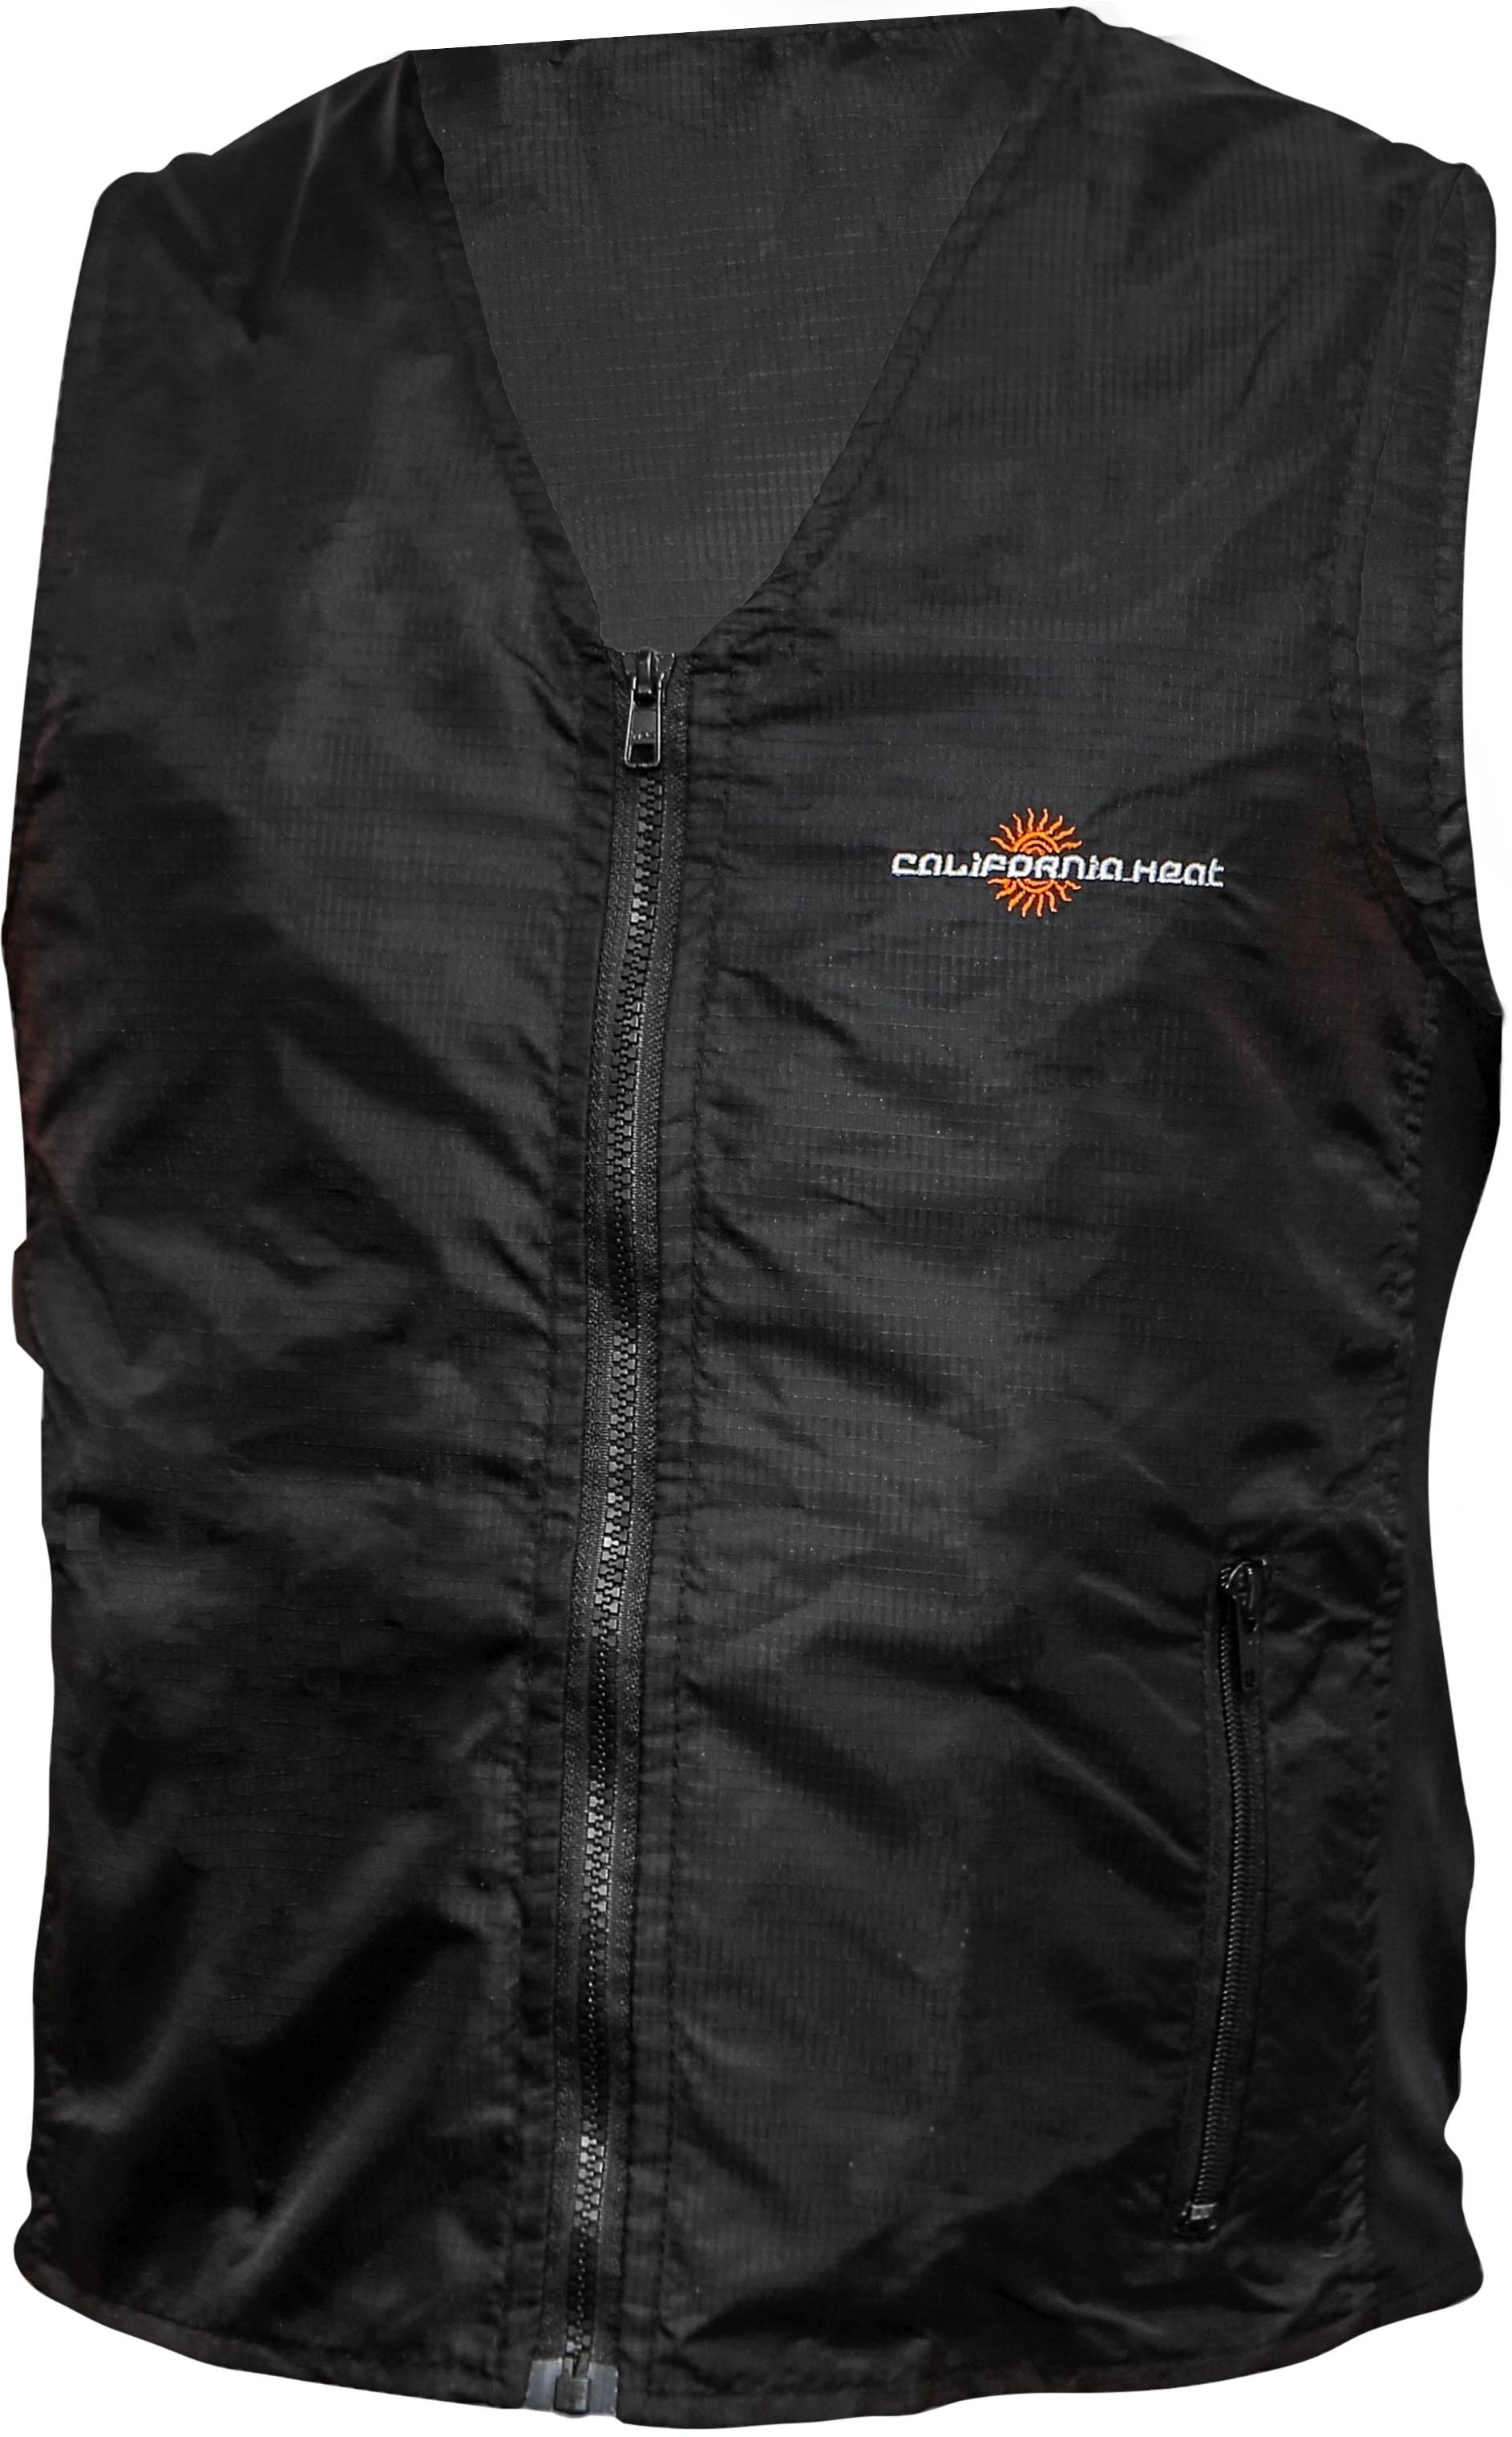 7V Heated Lithium-Ion Battery Vest Black 4X-Large/5X-Large - Click Image to Close